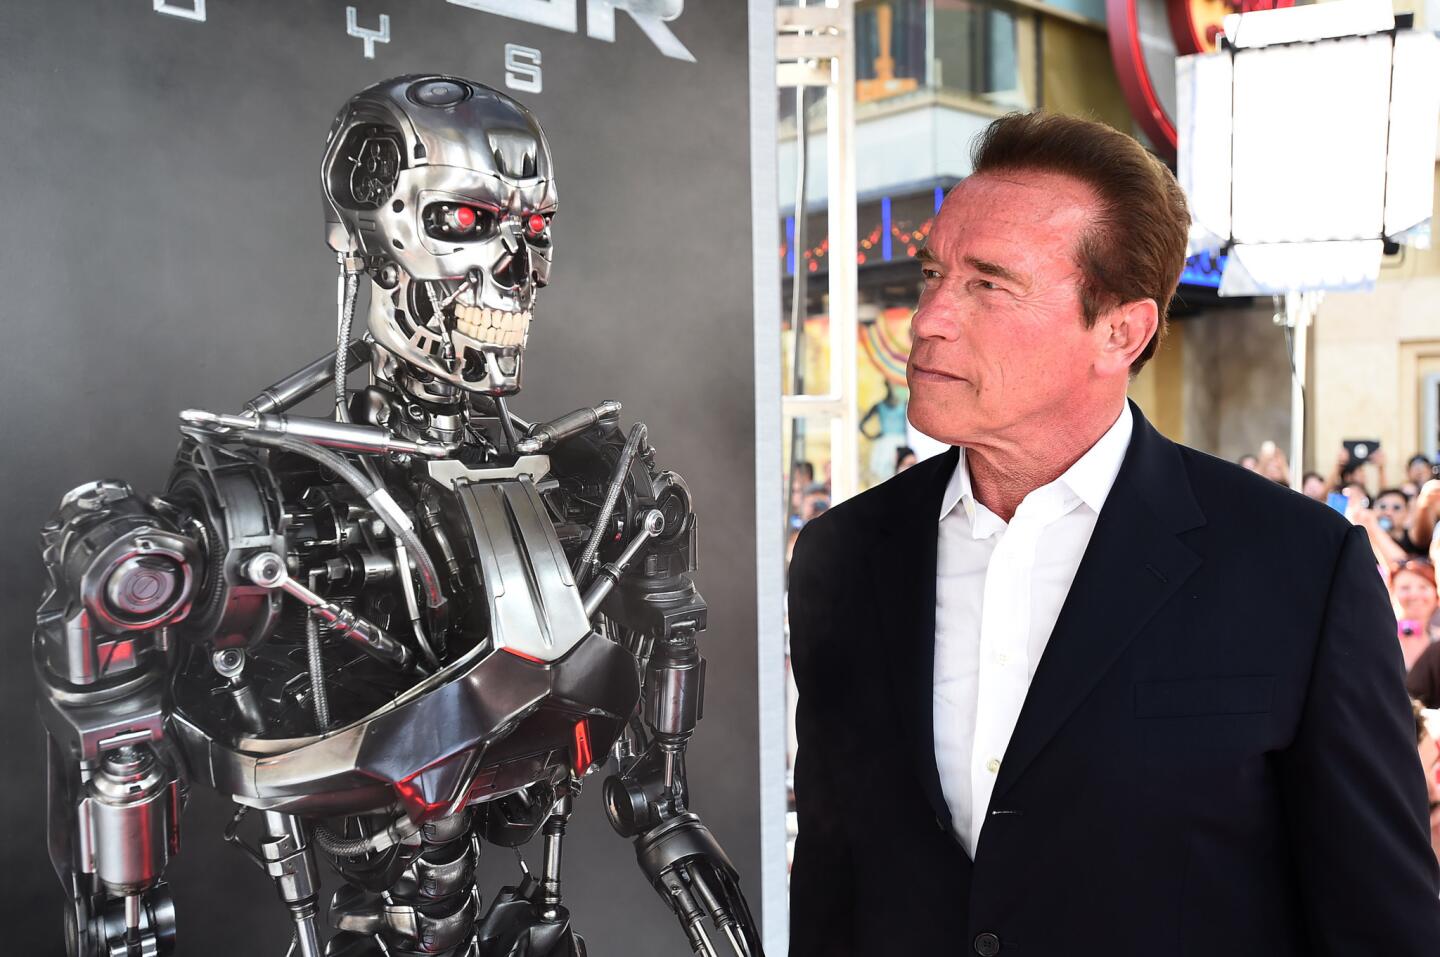 Over three decades in Hollywood and in the public eye, Arnold Schwarzenegger, pictured above at the "Terminator Genisys" premiere, has had some indelible moments on the big screen -- and some that he (and we) would probably like to forget. Here's a look back at some of the key markers in his big-screen career.